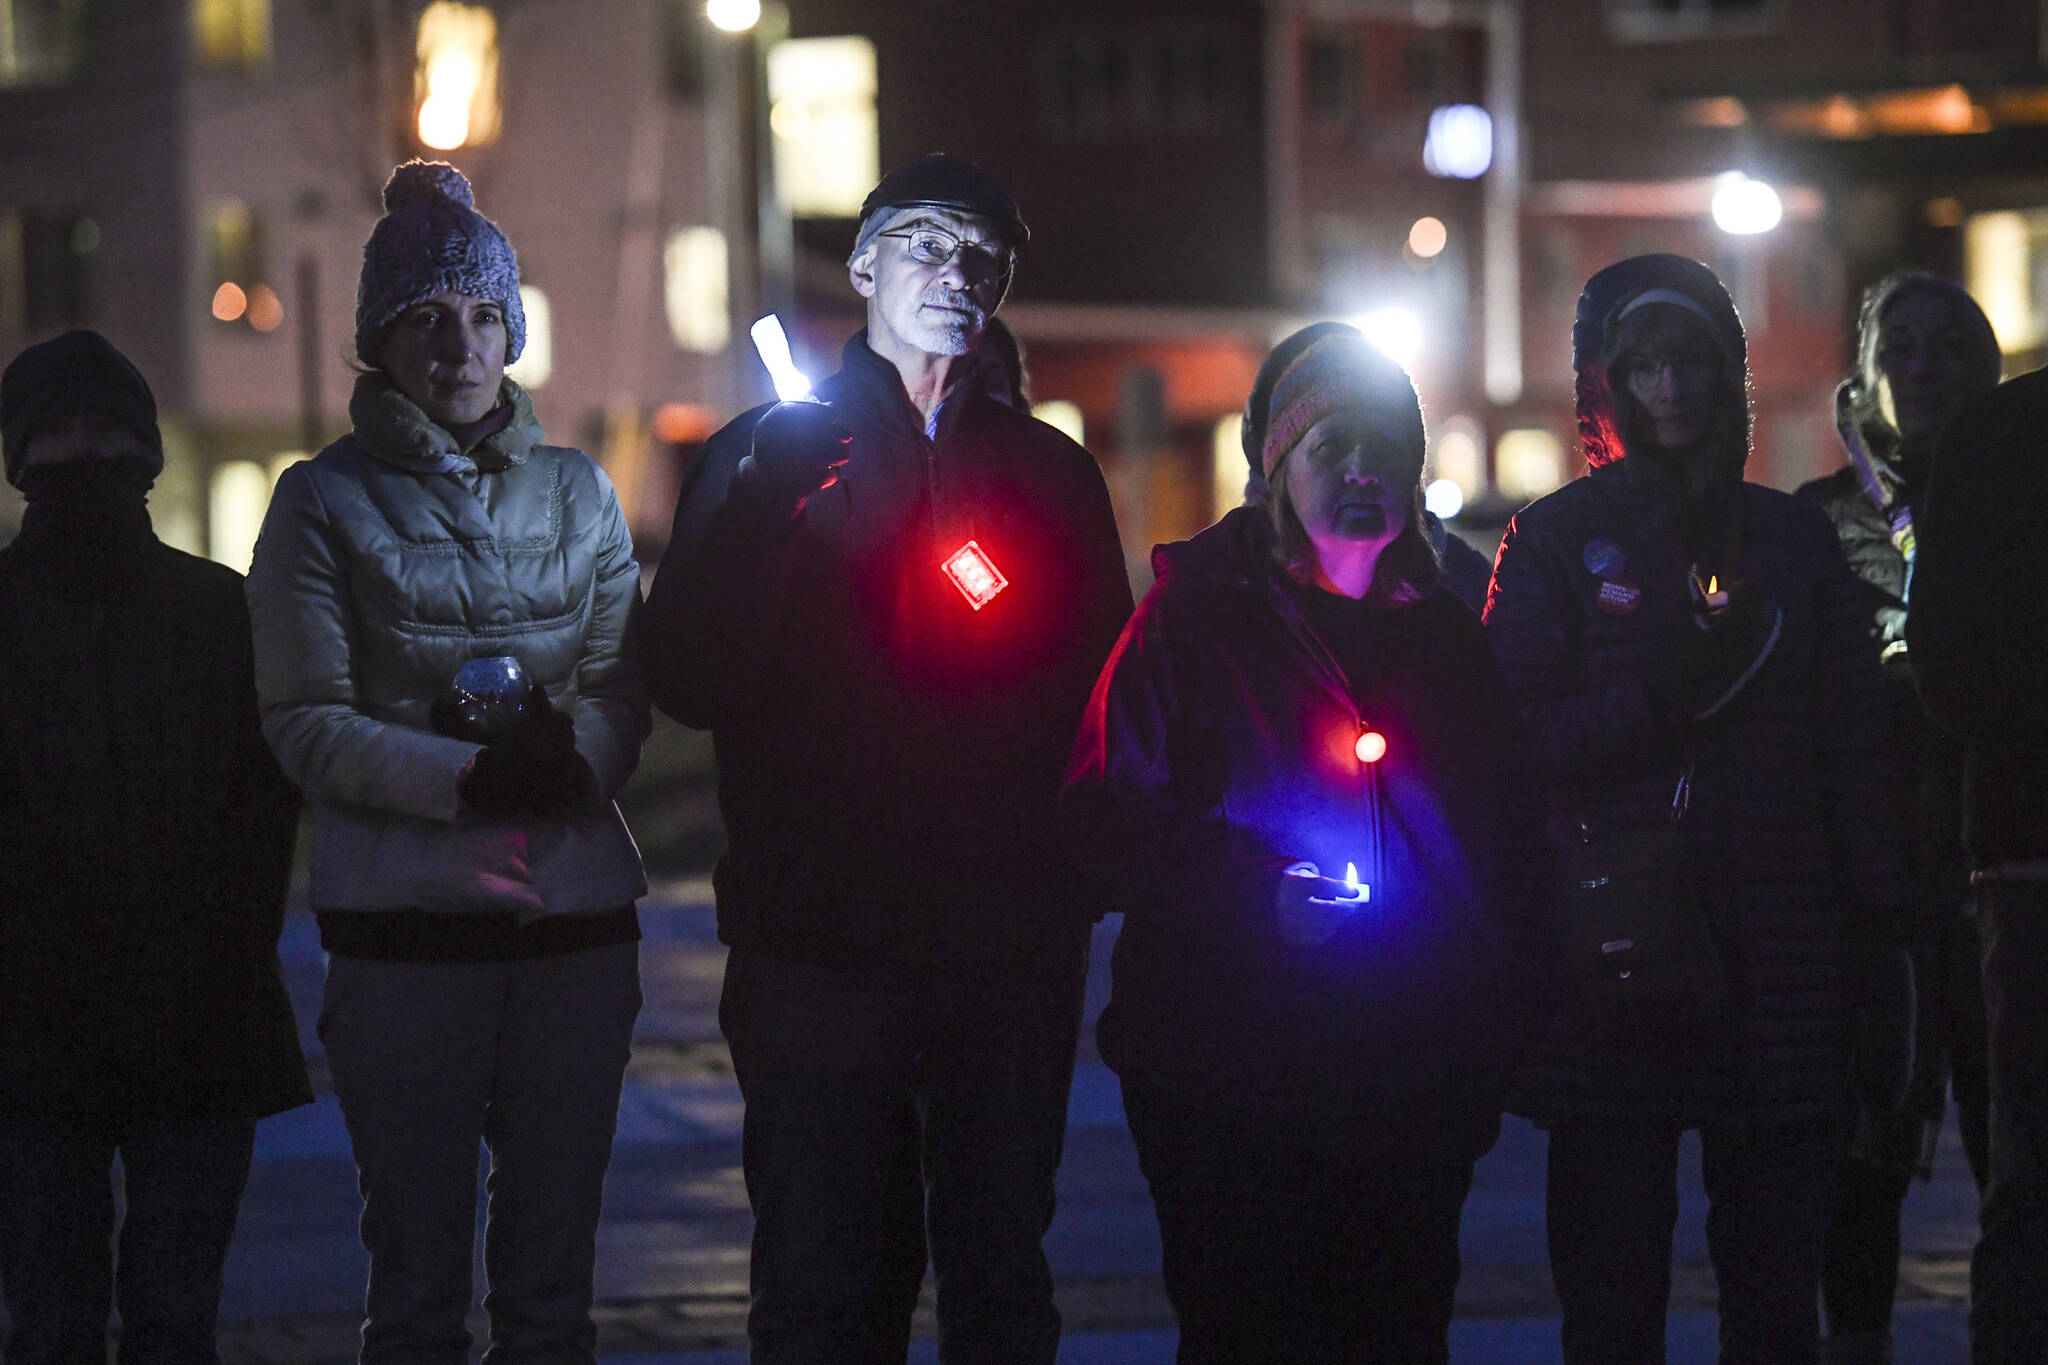 Juneau residents attend a vigil to end gun violence sponsored by Moms Demand Action at the Mayor Bill Overstreet Park on Saturday, Dec. 14, 2019. Tonight, members of Moms Demand Action will host a vigil on Zoom. (Michael Penn/ Juneau Empire File)